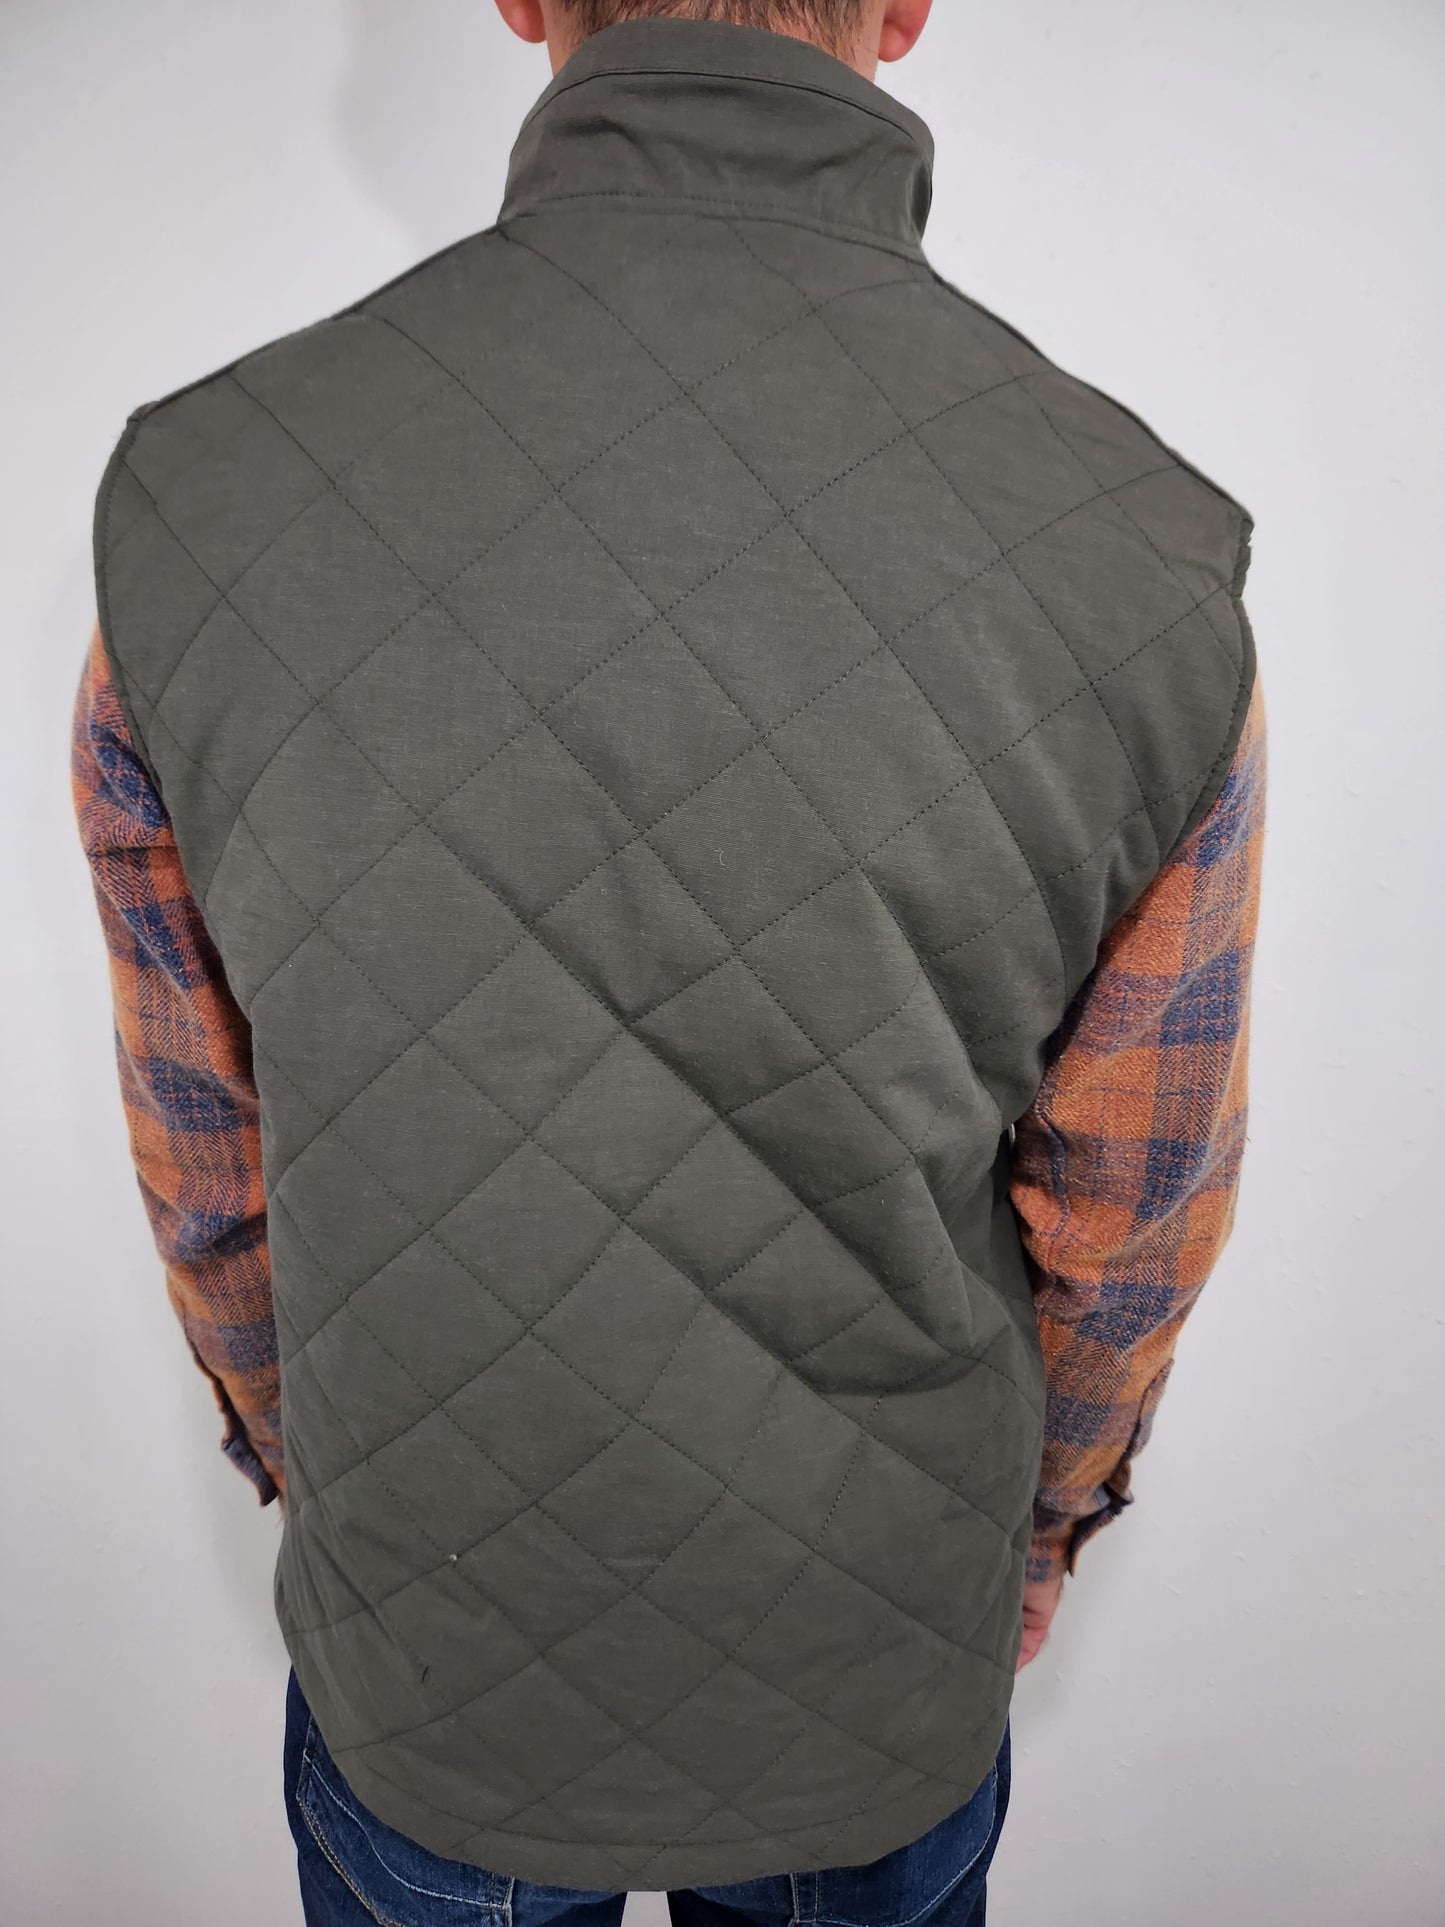 FLAG & ANTHEM CHAPIN QUILTED VEST - OLIVE